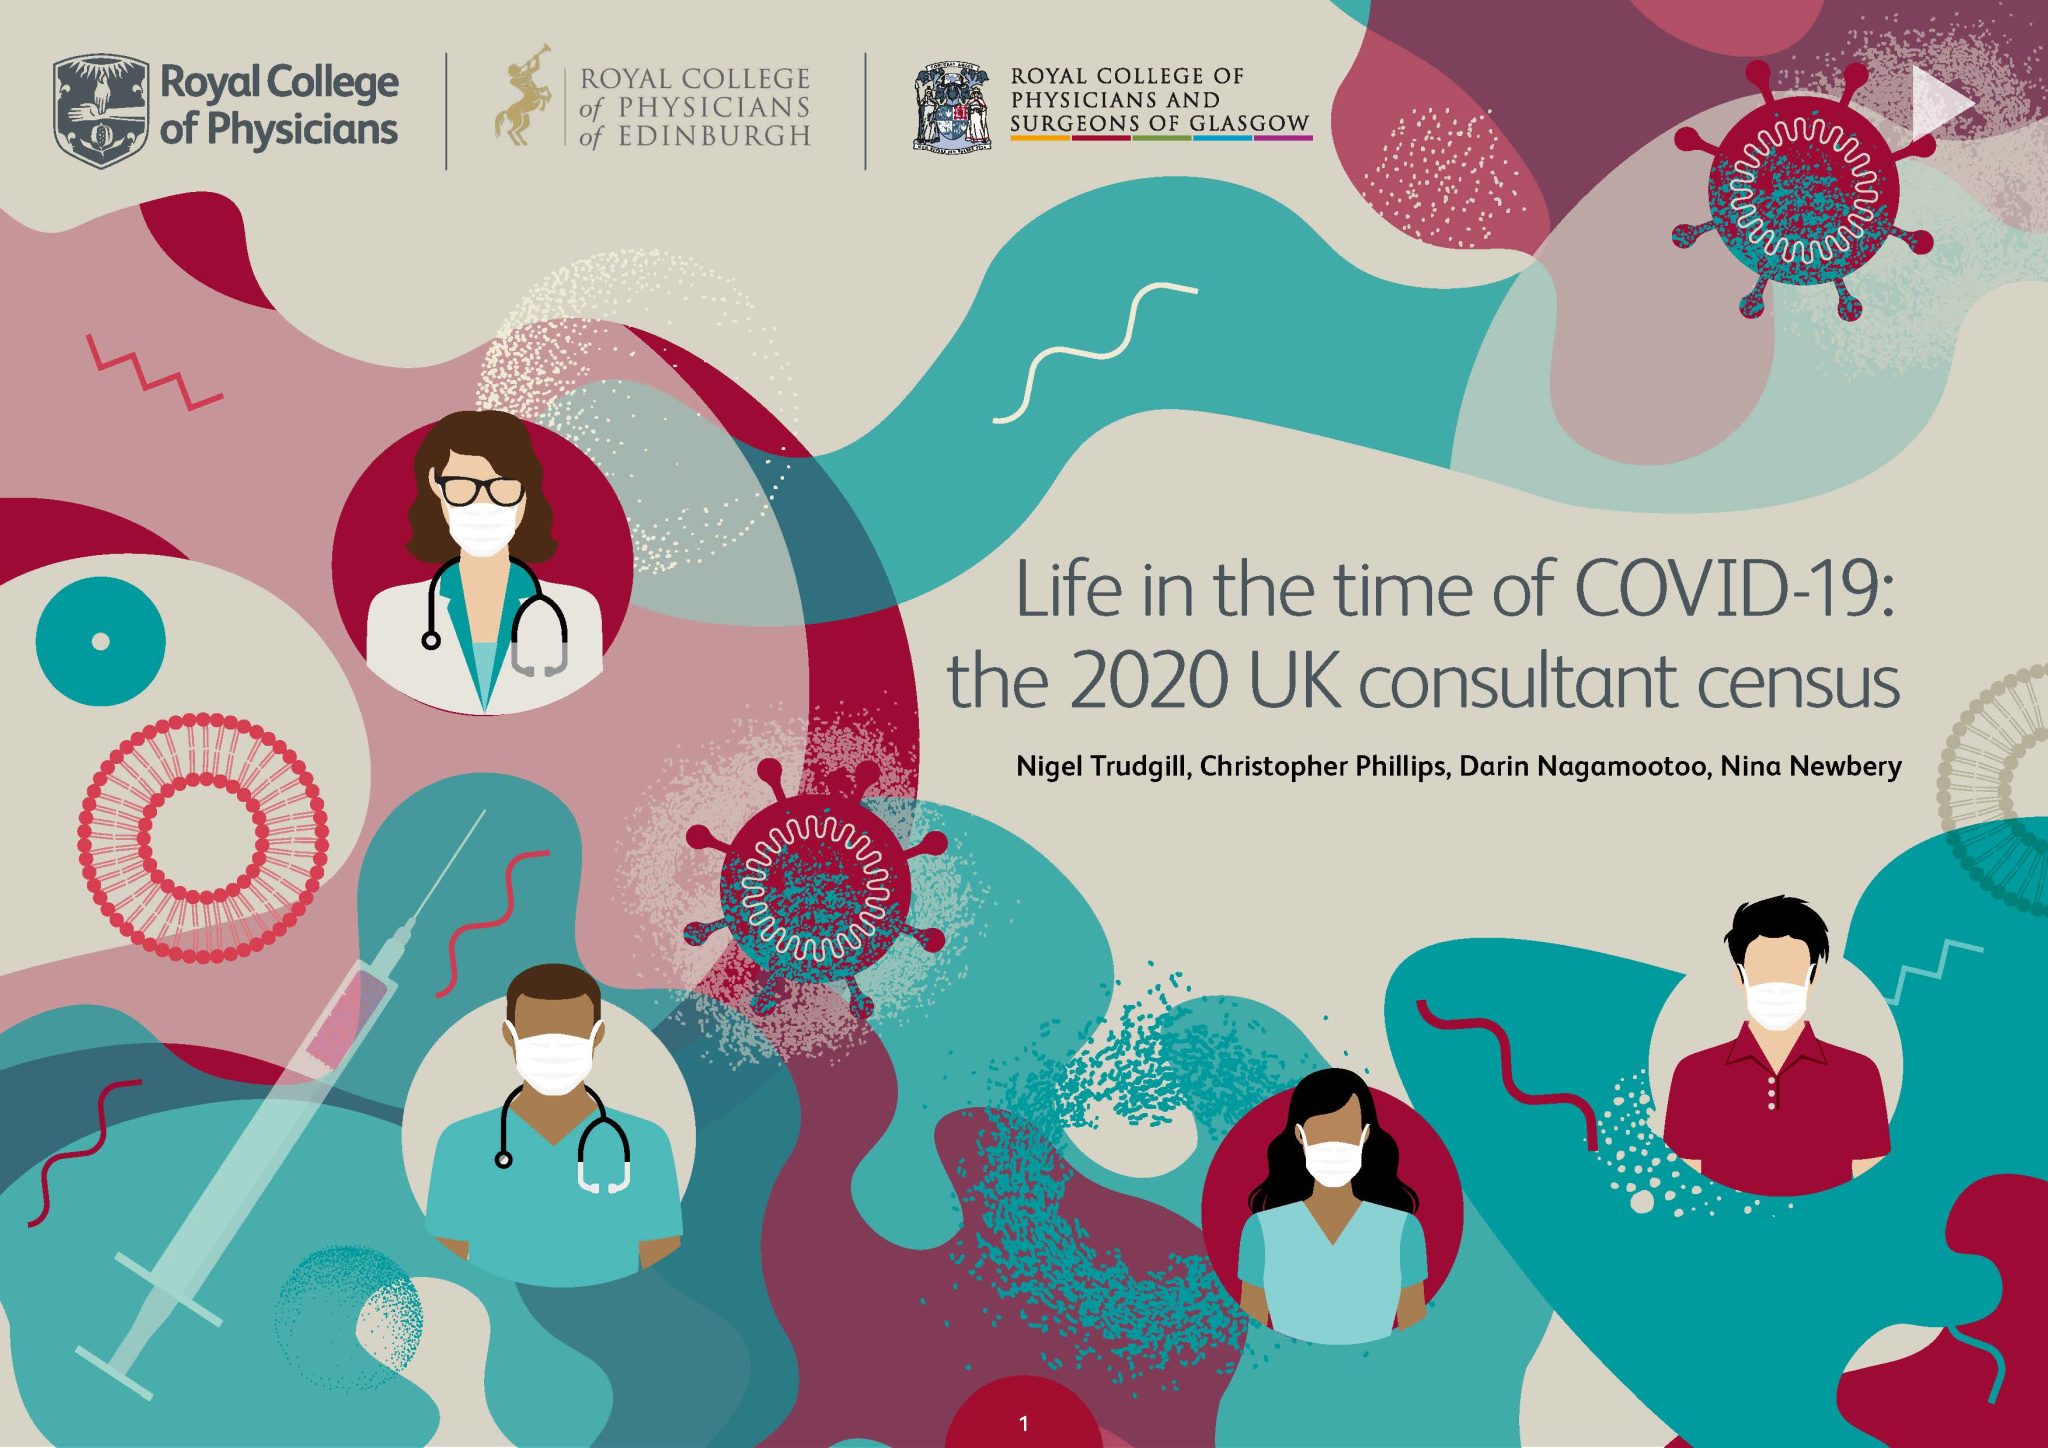 Life in the time of Covid-19: the 2020 UK consultant census